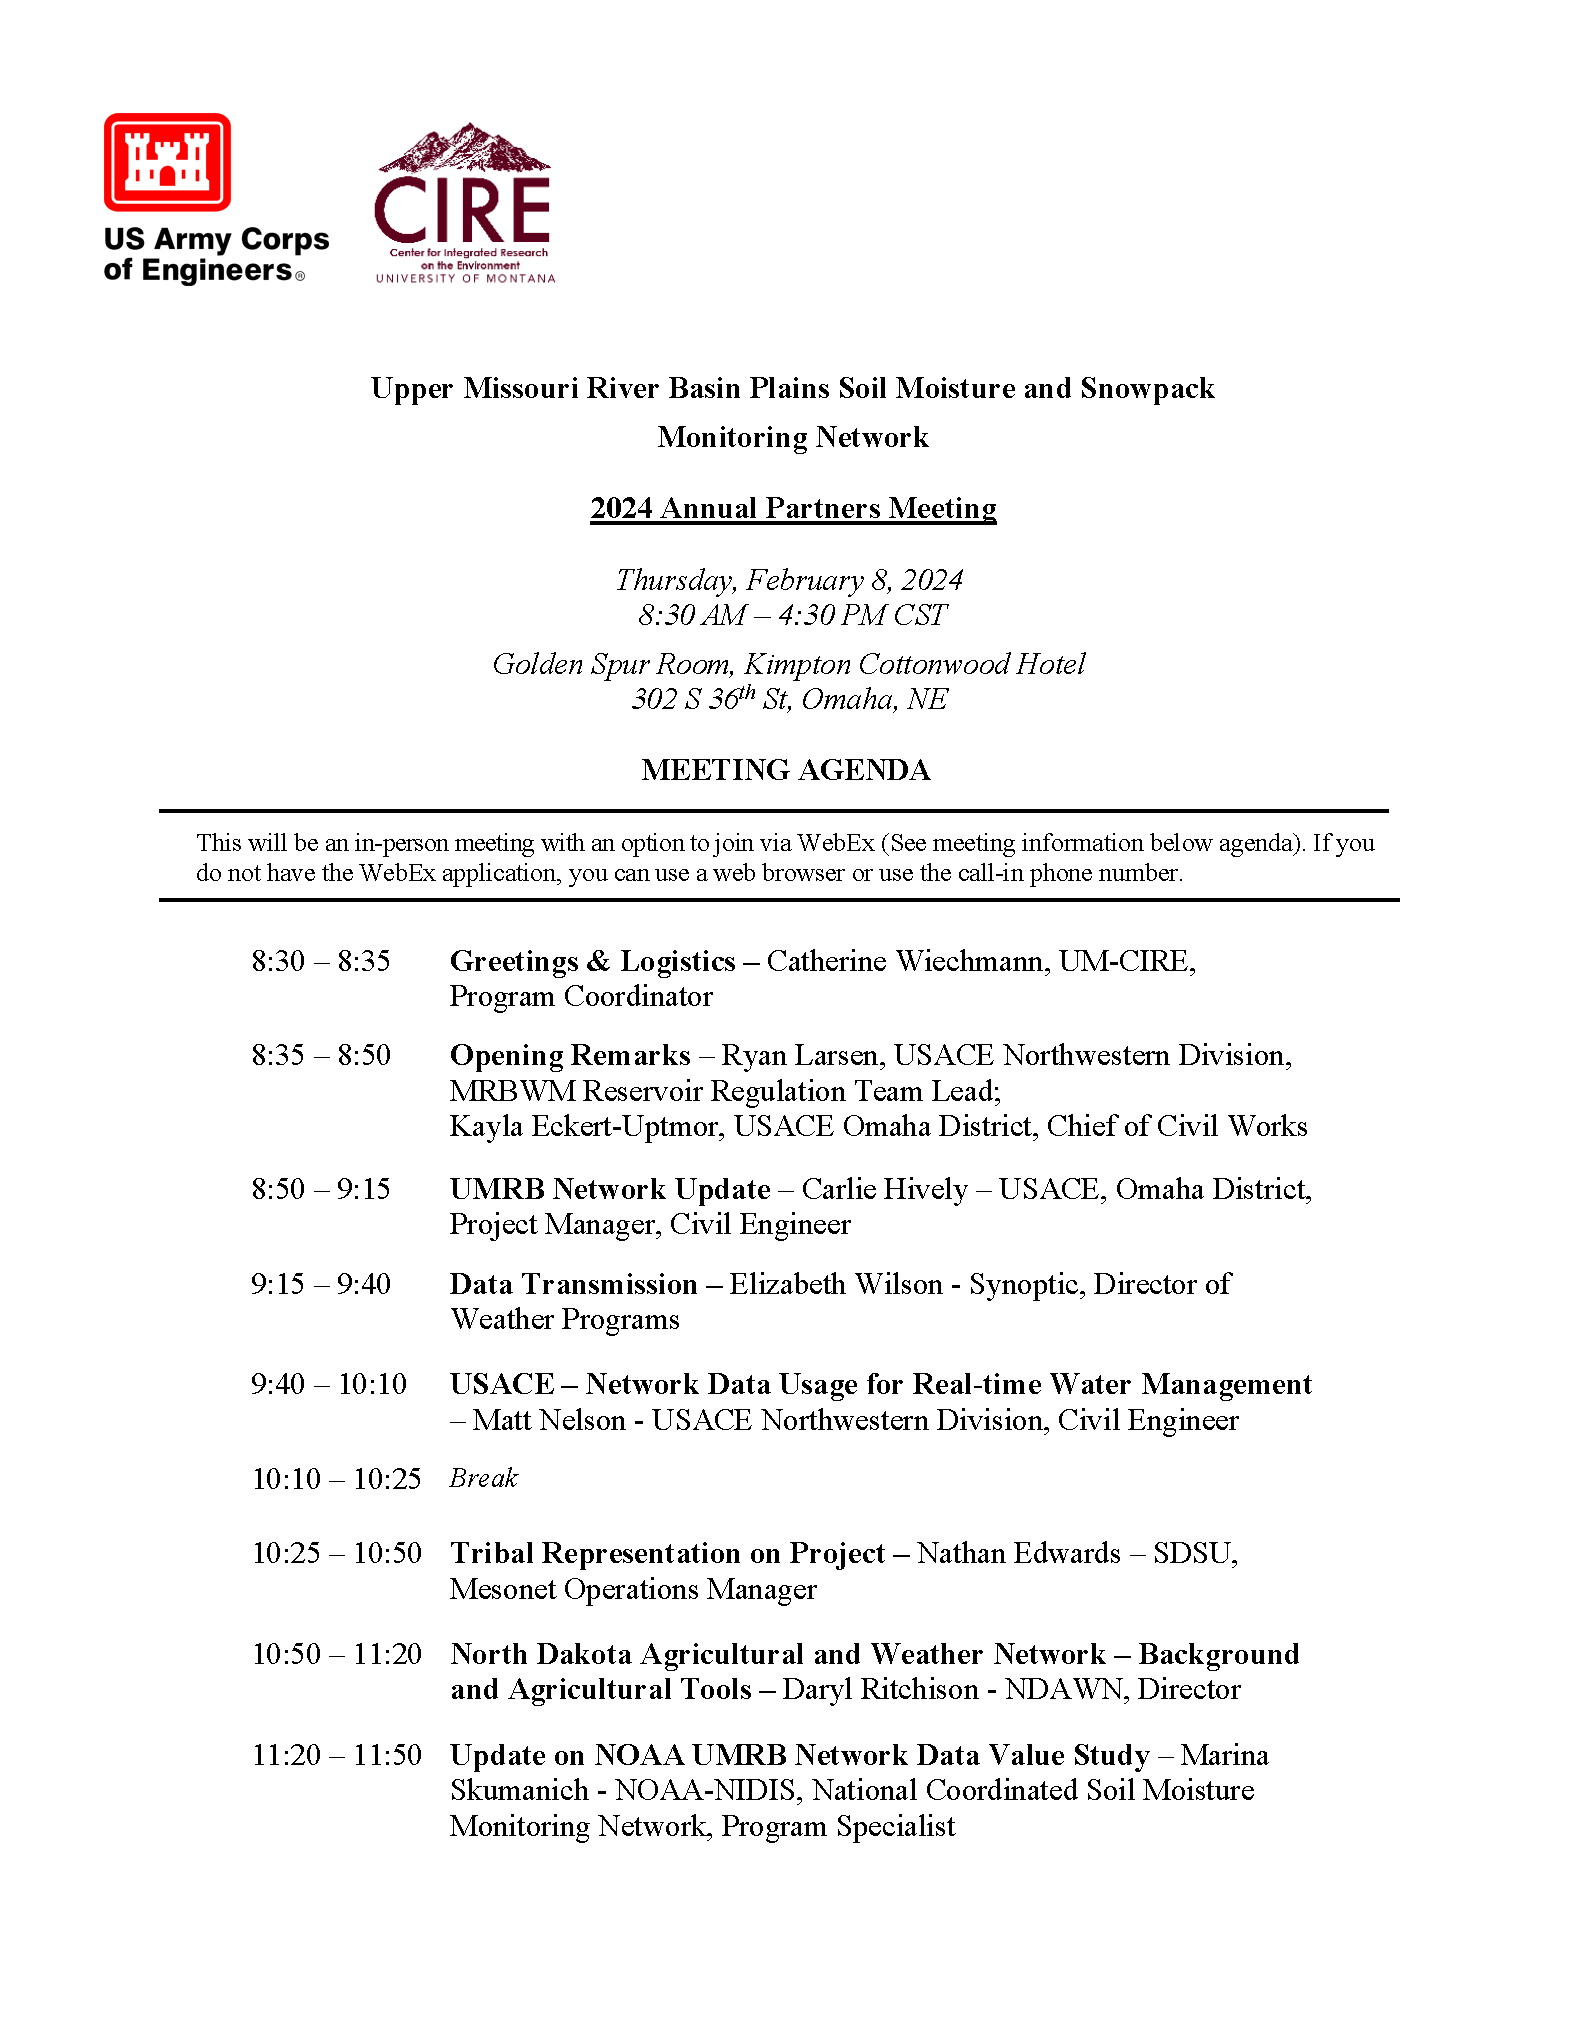 2024-annual-umrb-project-interagency-meeting_-8-feb-2024_agenda-v-2.0_page_1.png